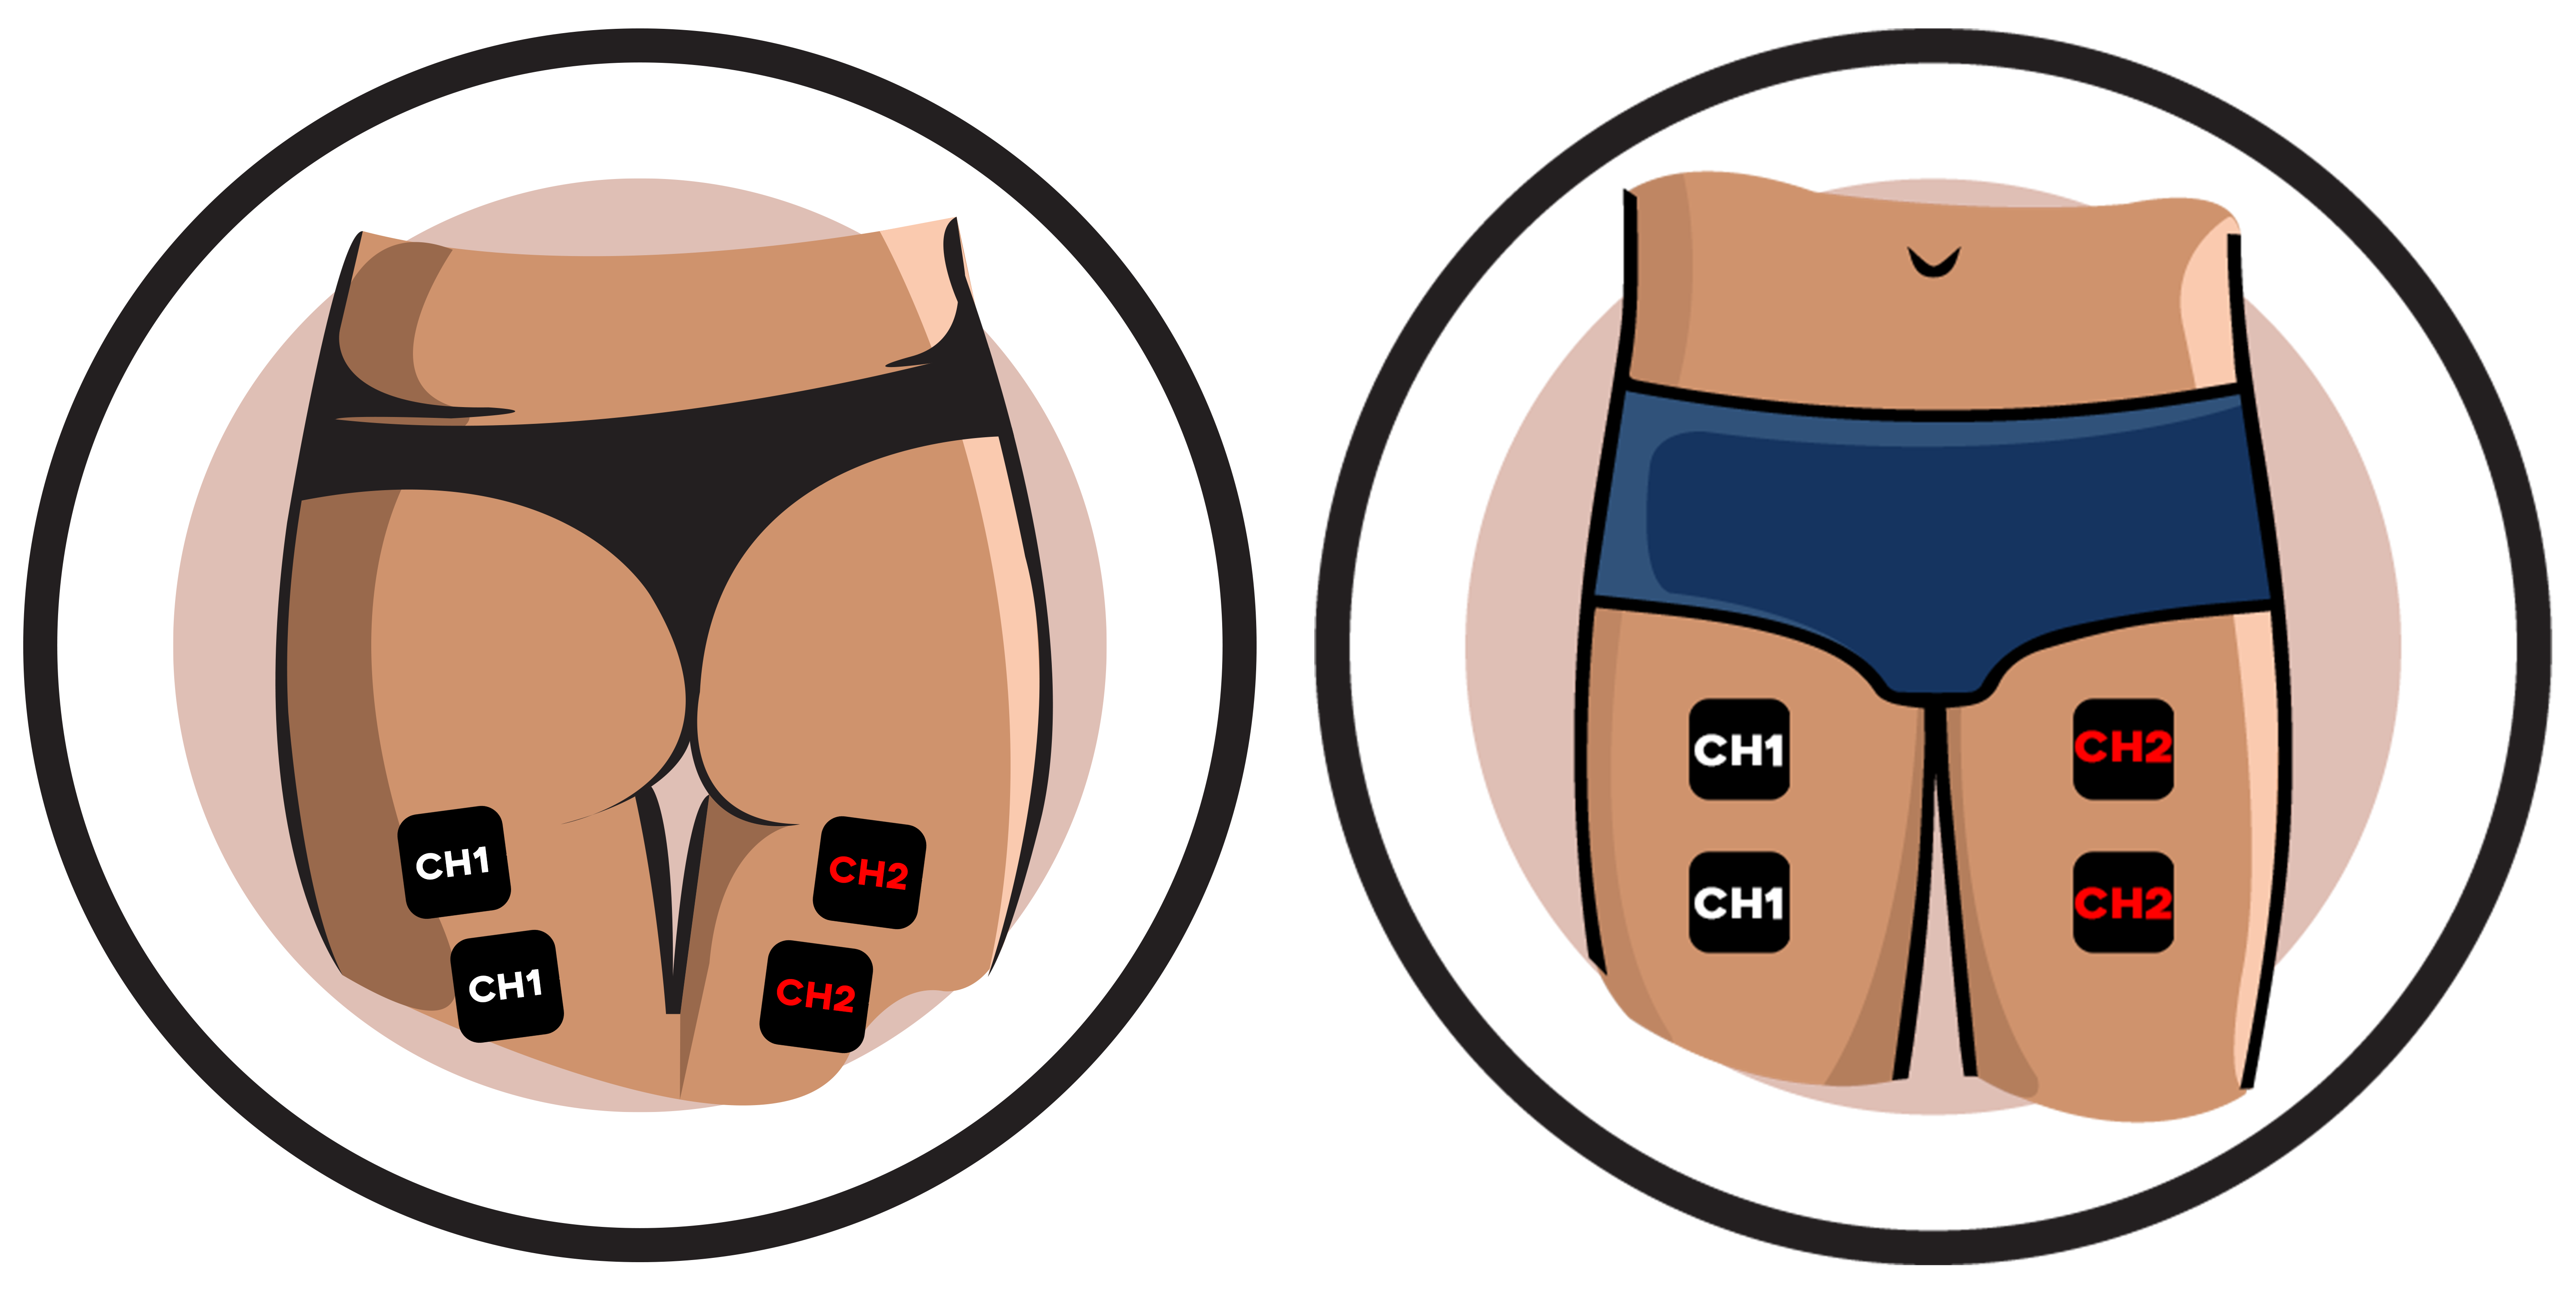 Tens Electrode Placement: What You Should Know